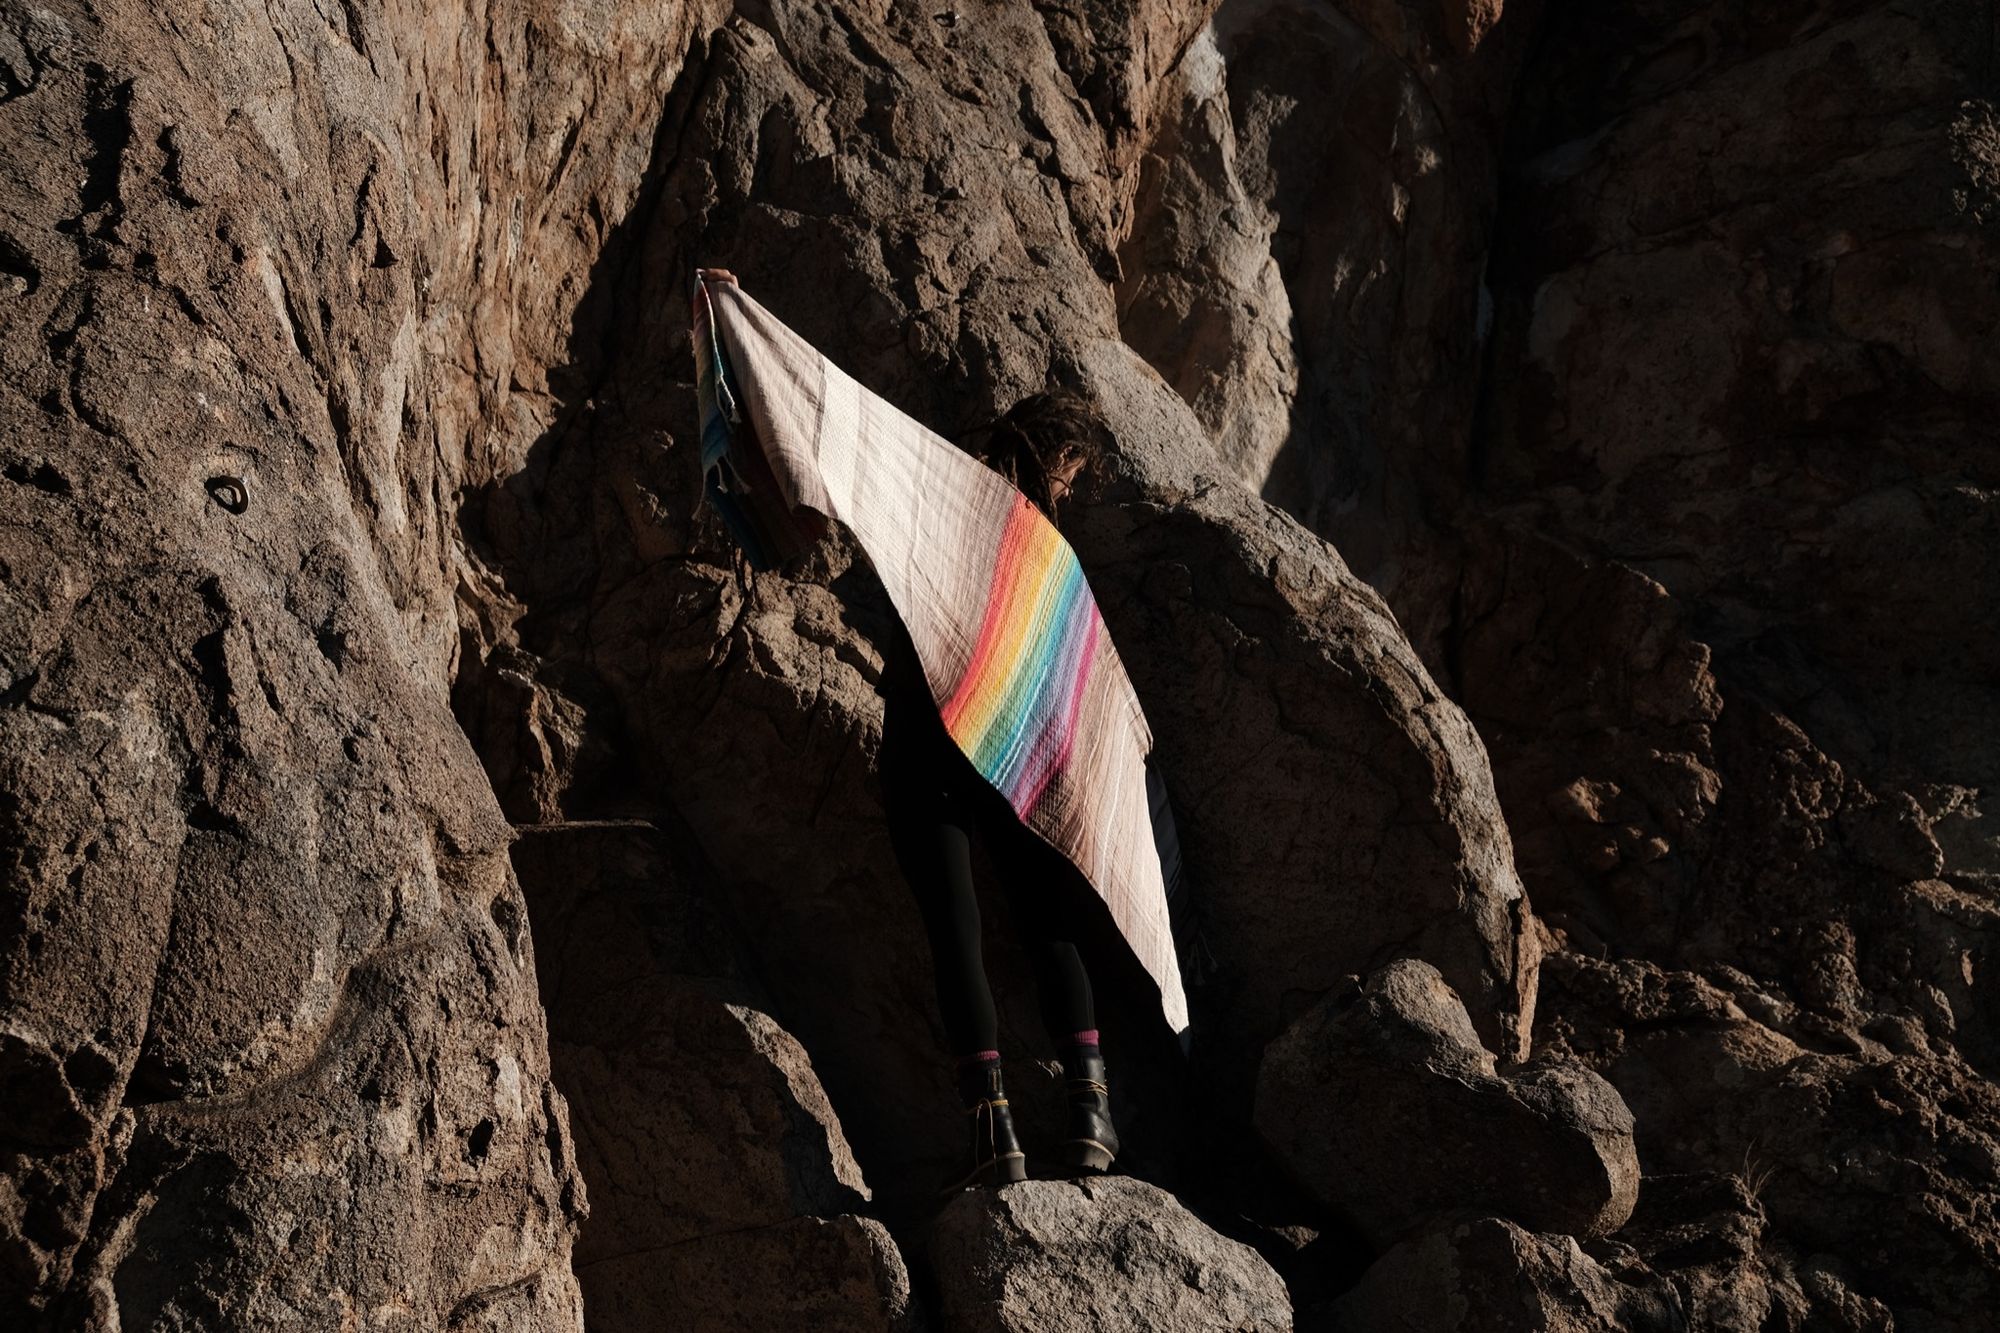 A women stands in the shadow of a granite cliff silhouetted by evening light while holding a rainbow and grey handwoven shawl. 